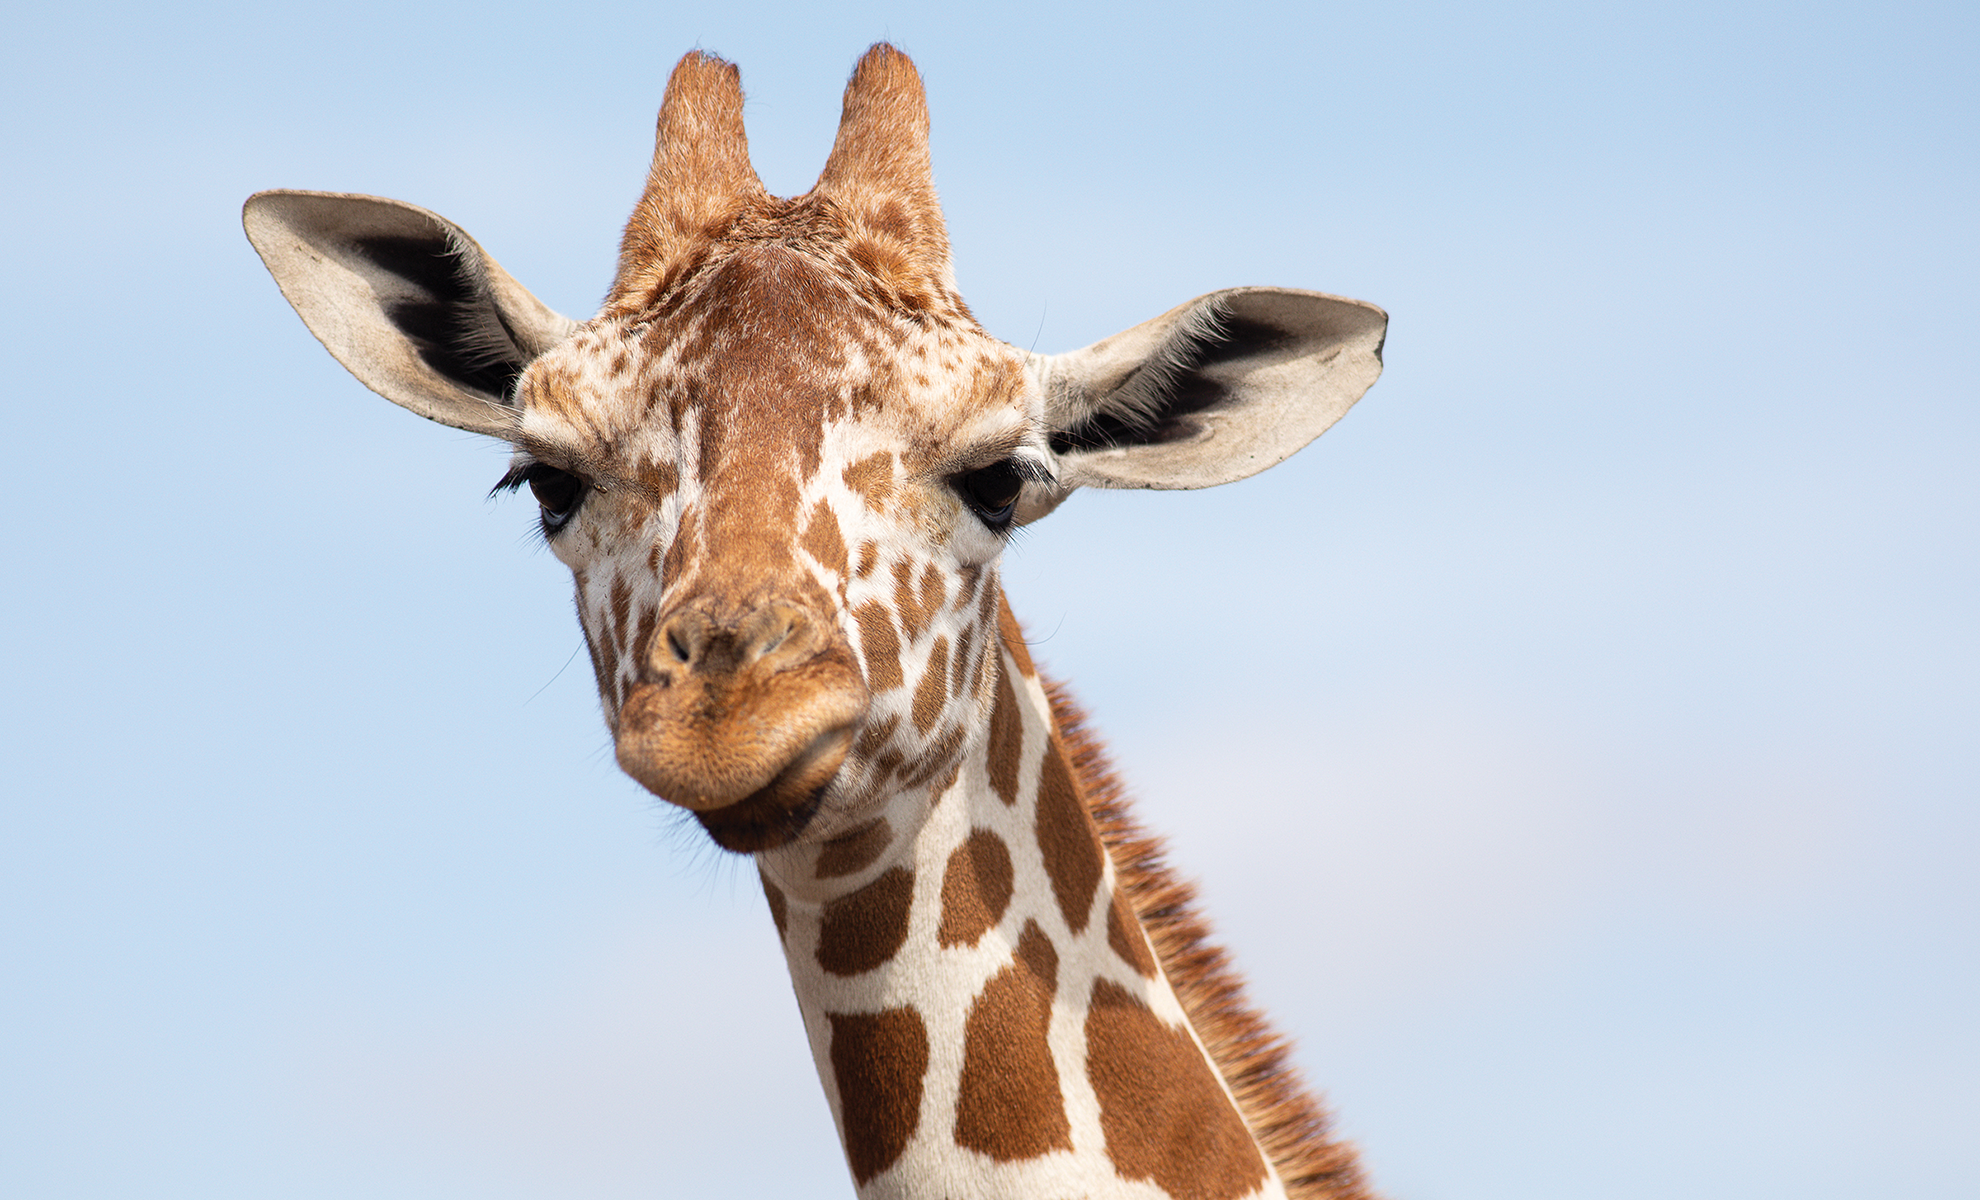 Why are giraffes wandering around the Texas Hill Country?